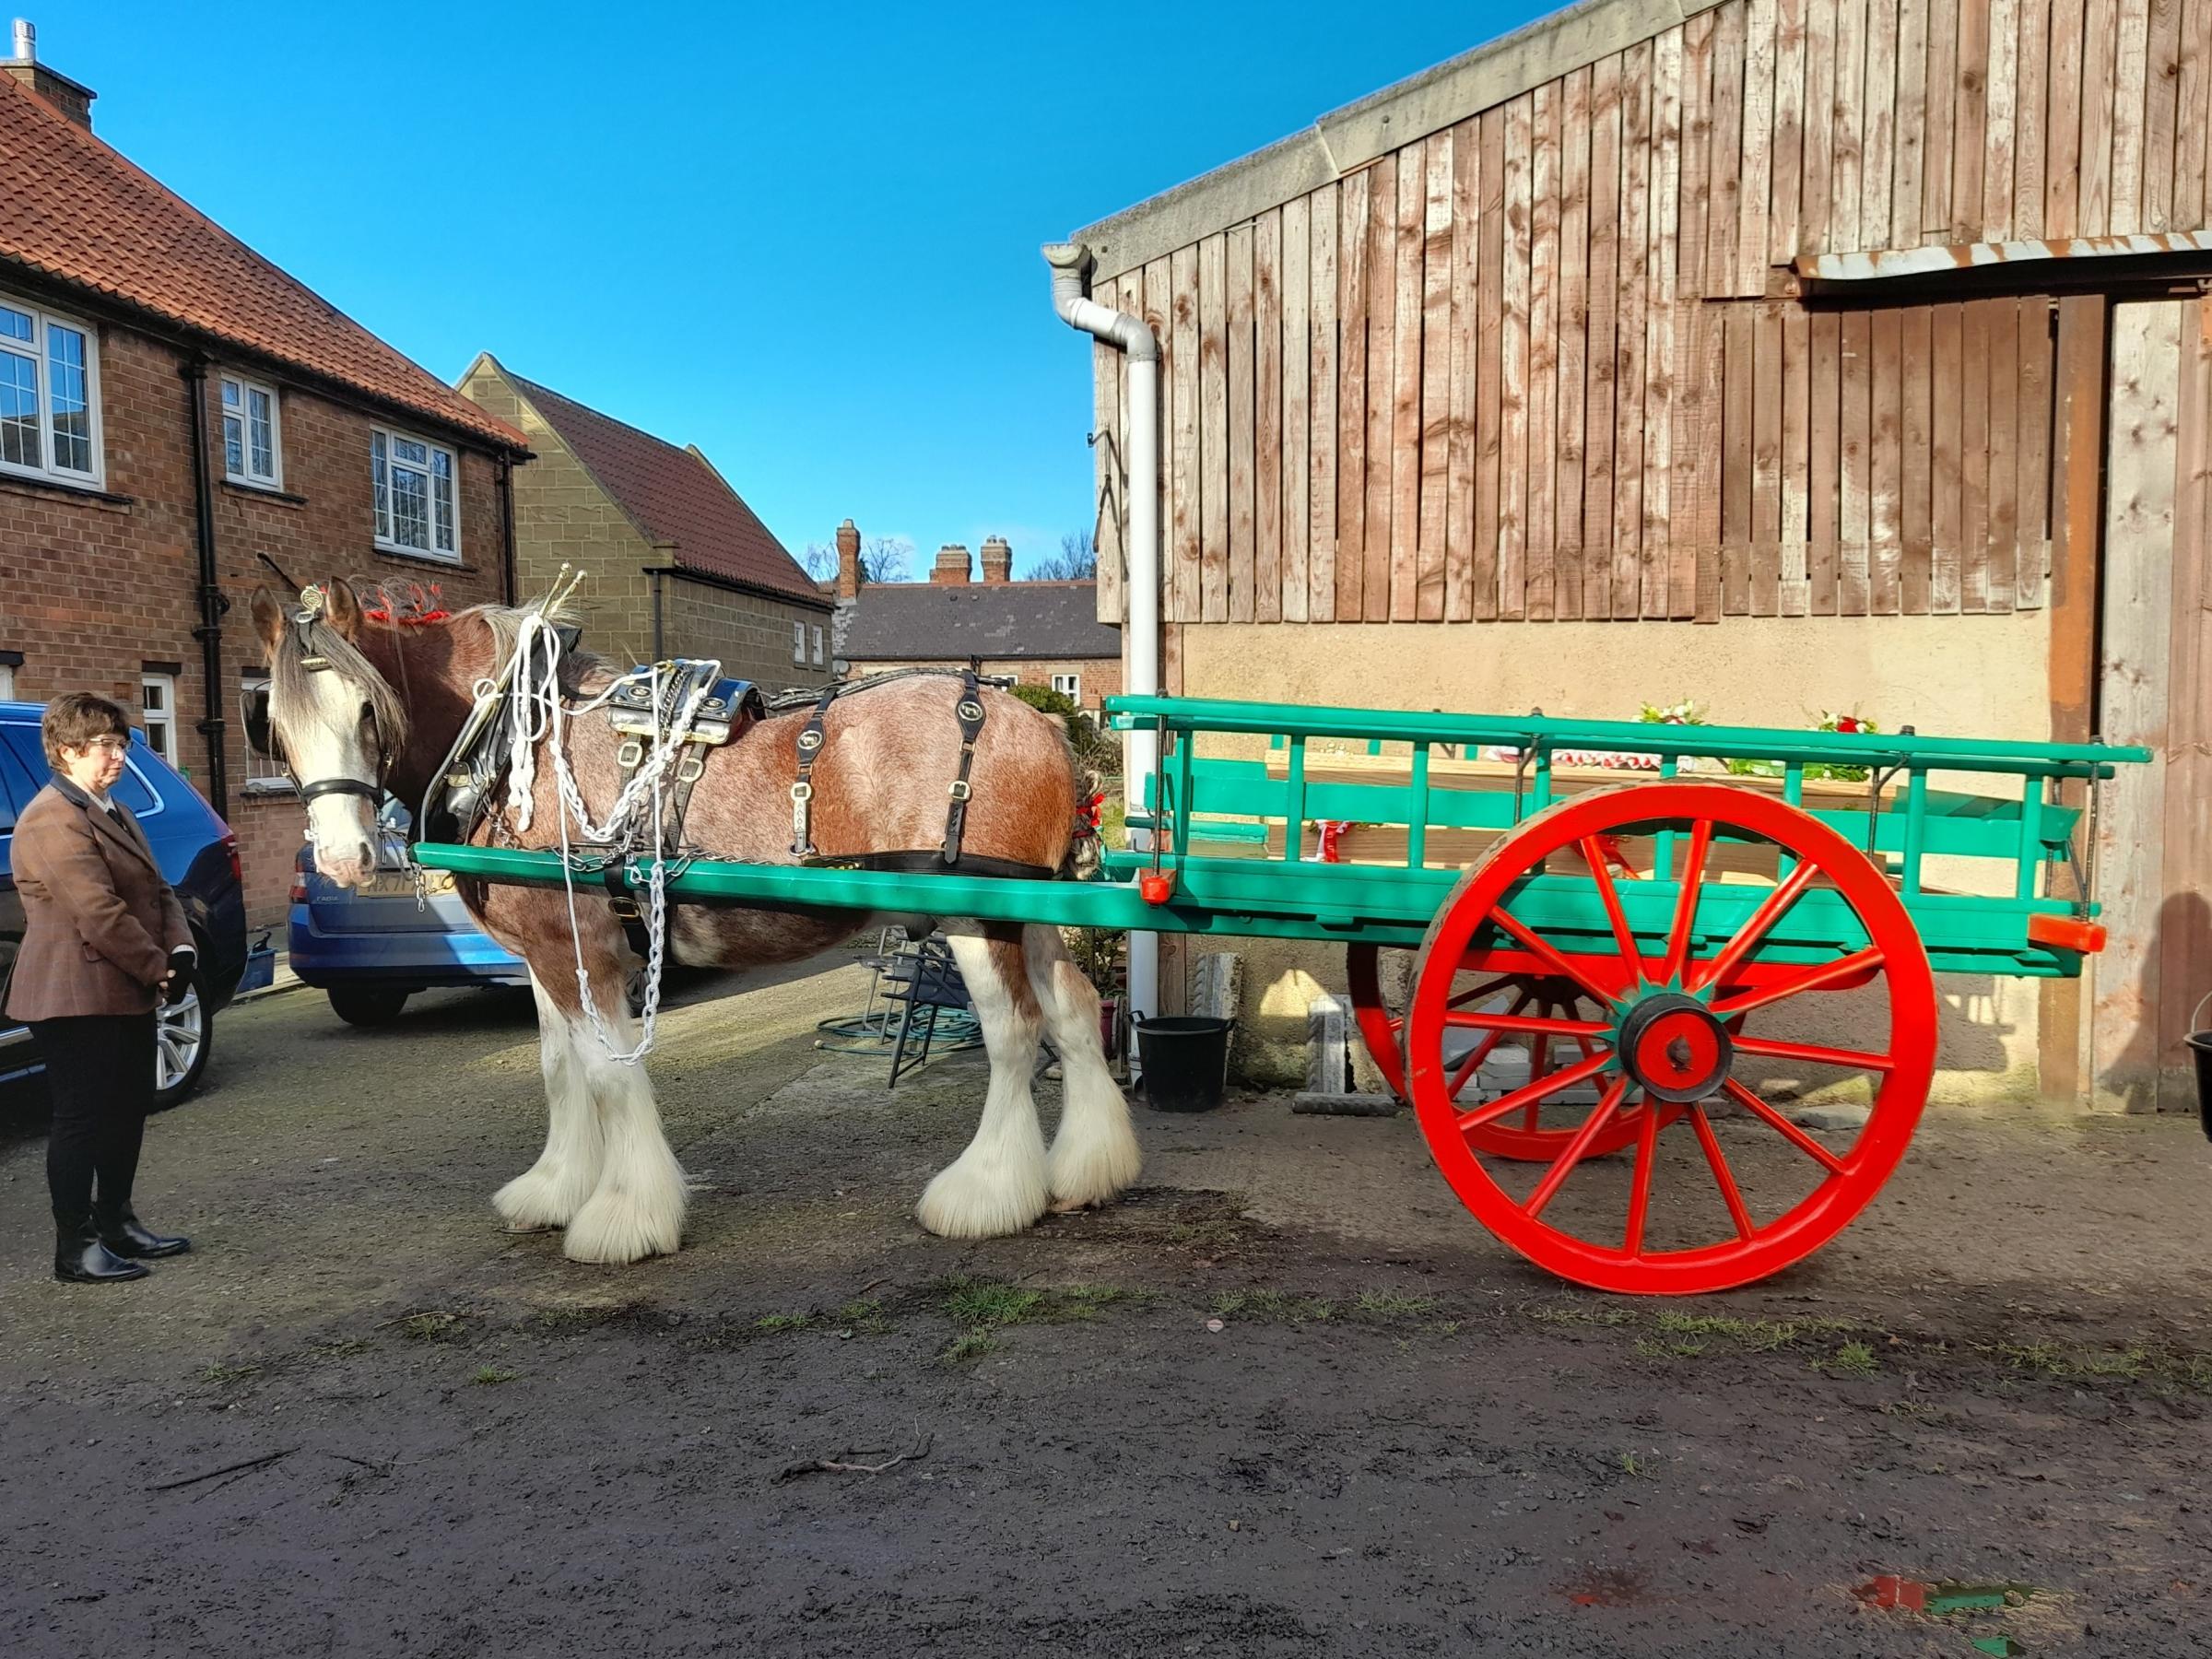 Teddy made his final journey pulled by a Clydesdale 